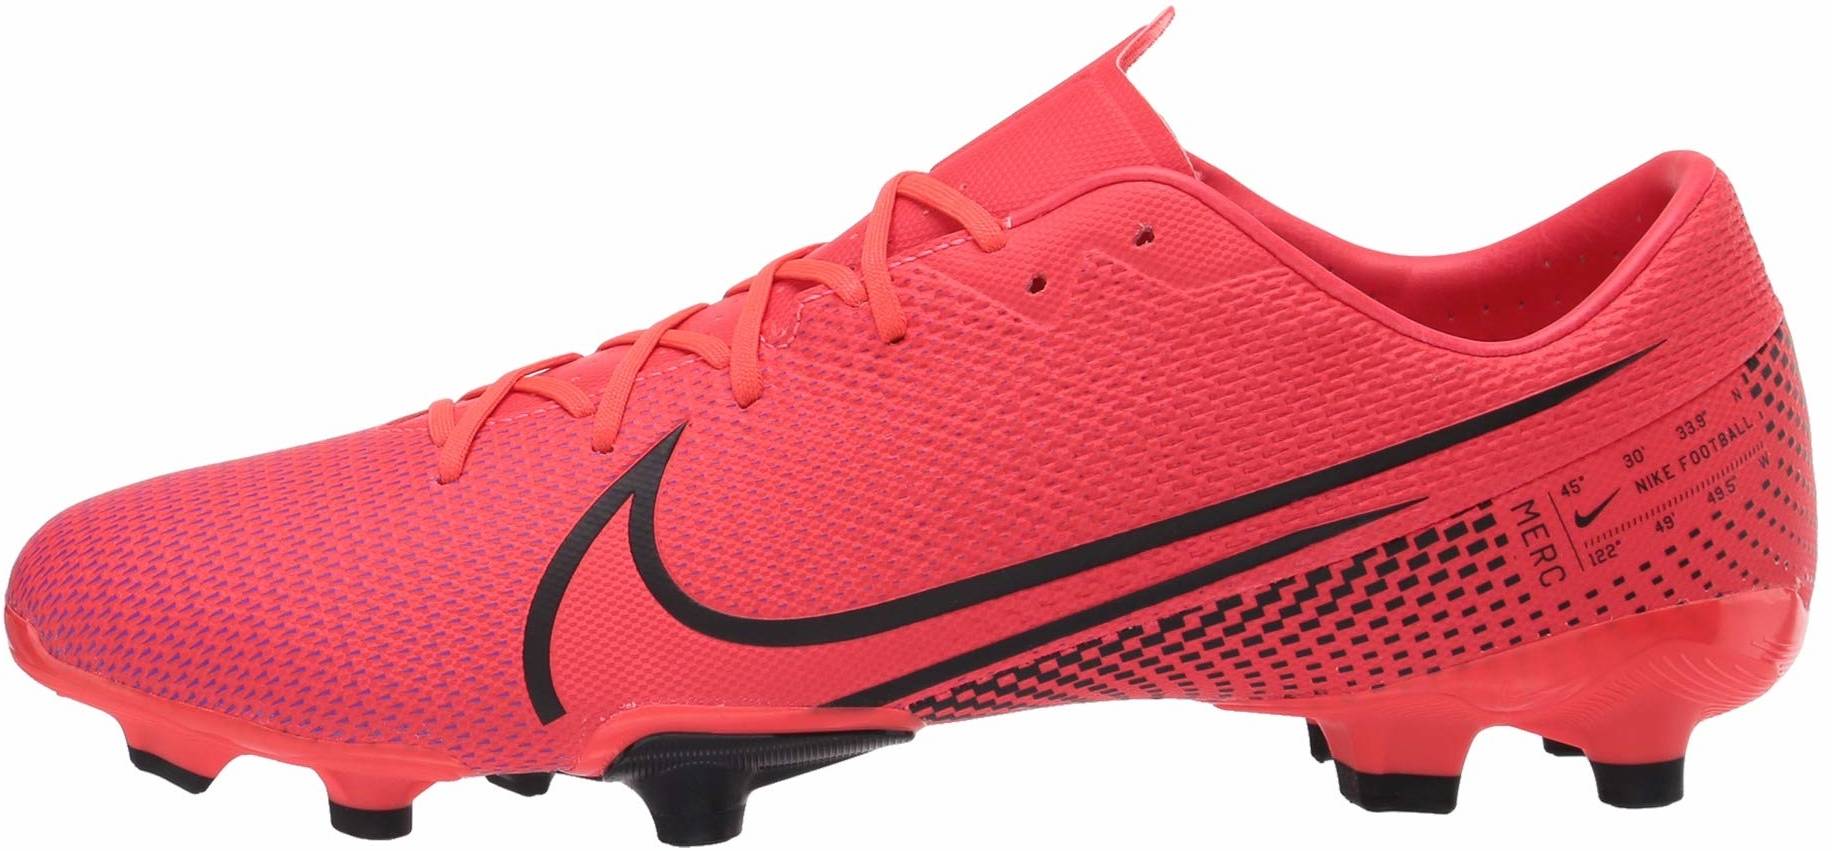 all red nike soccer cleats